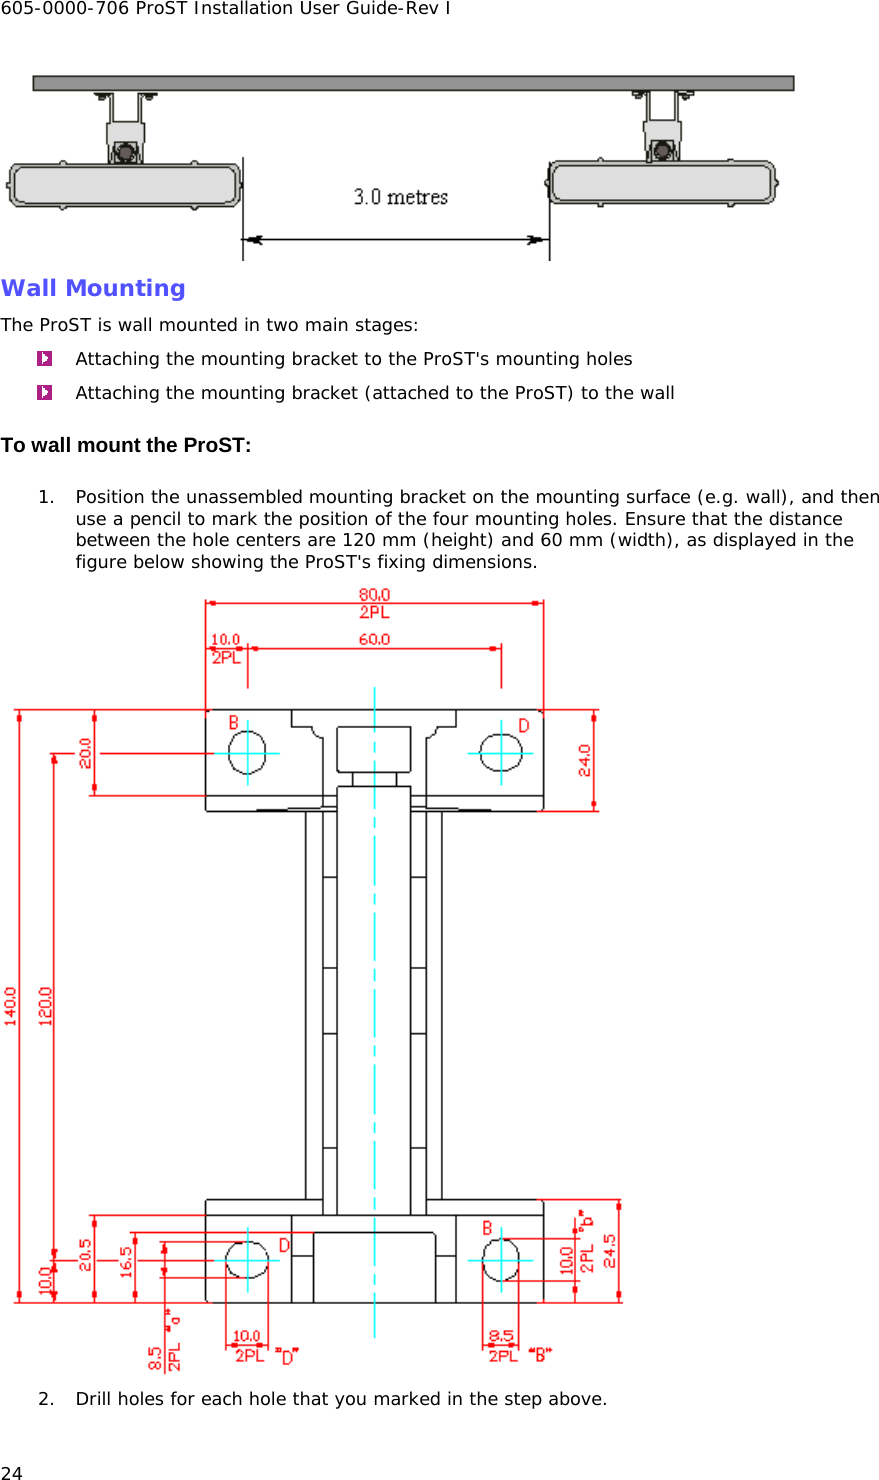 605-0000-706 ProST Installation User Guide-Rev I 24  Wall Mounting The ProST is wall mounted in two main stages:  Attaching the mounting bracket to the ProST&apos;s mounting holes  Attaching the mounting bracket (attached to the ProST) to the wall To wall mount the ProST: 1. Position the unassembled mounting bracket on the mounting surface (e.g. wall), and then use a pencil to mark the position of the four mounting holes. Ensure that the distance between the hole centers are 120 mm (height) and 60 mm (width), as displayed in the figure below showing the ProST&apos;s fixing dimensions.  2. Drill holes for each hole that you marked in the step above. 